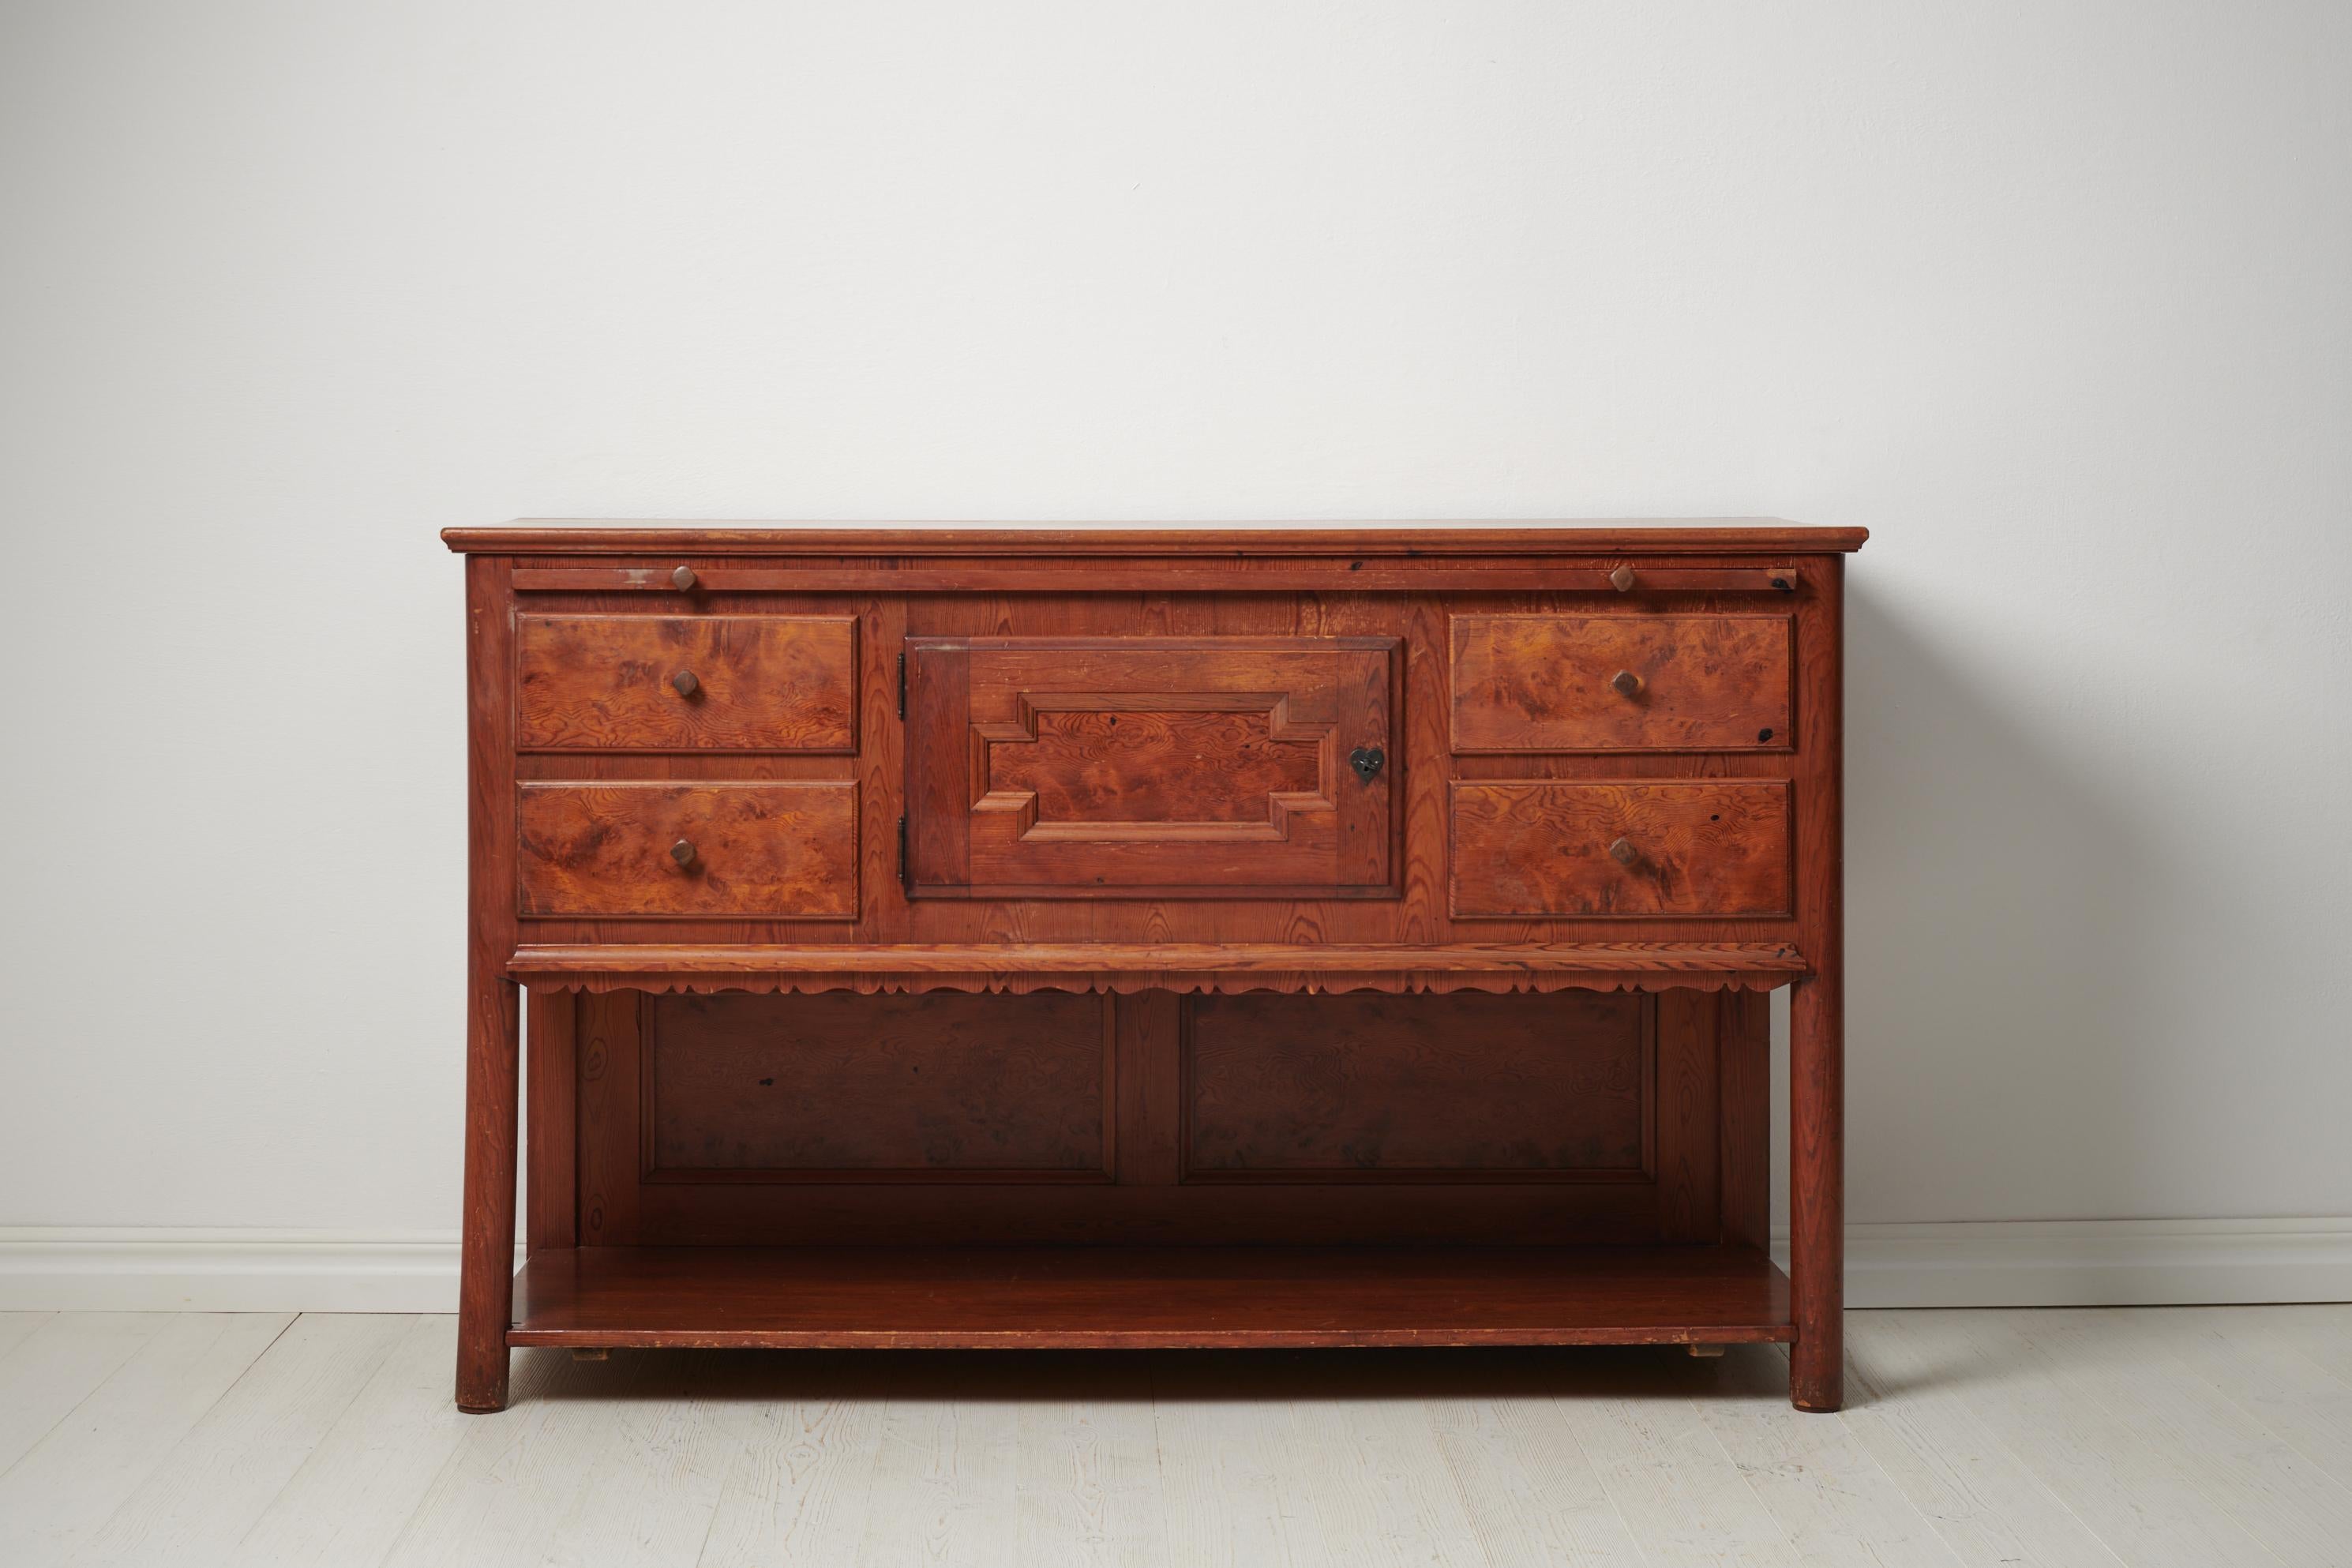 Swedish modern serving sideboard made by Erik Alström Handels Fabriks AB around 1920. The sideboard is made in solid pine and has an acid stained front to the drawers and door. It also has an extendable table top to be used for serving, see